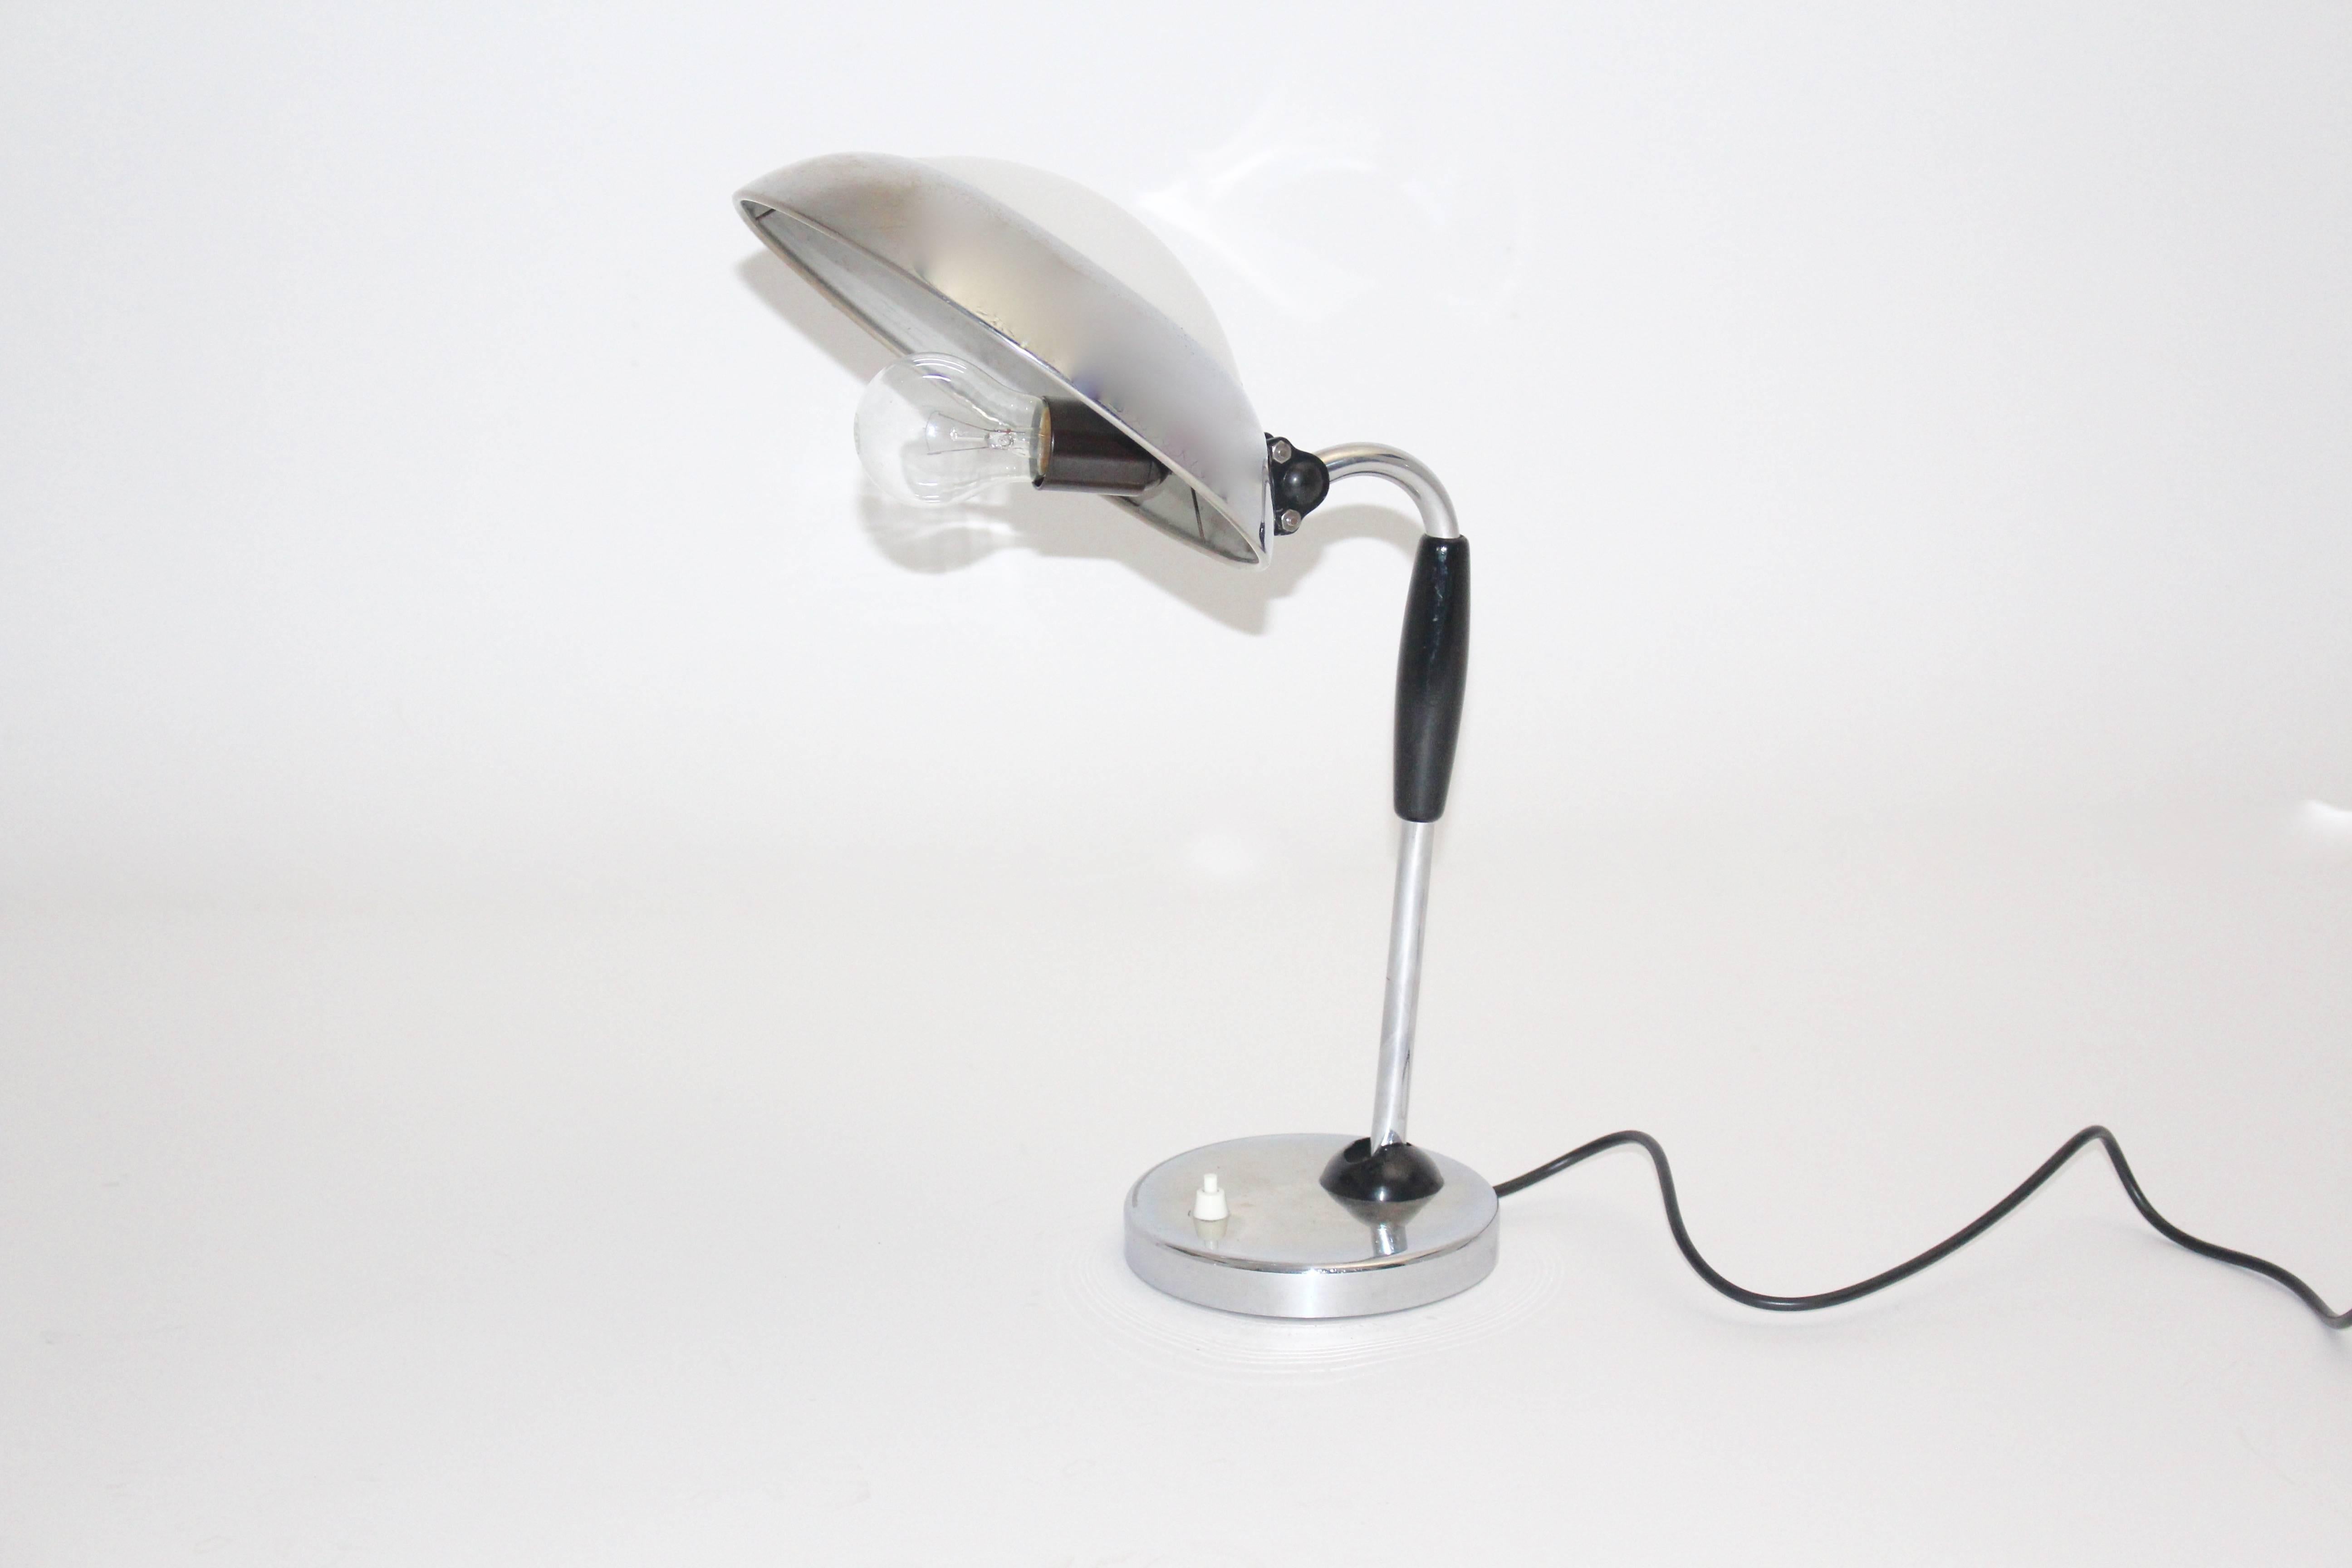 Lacquered Bauhaus Vintage Metal Desk Lamp Attributed to Christian Dell 1930s Germany For Sale